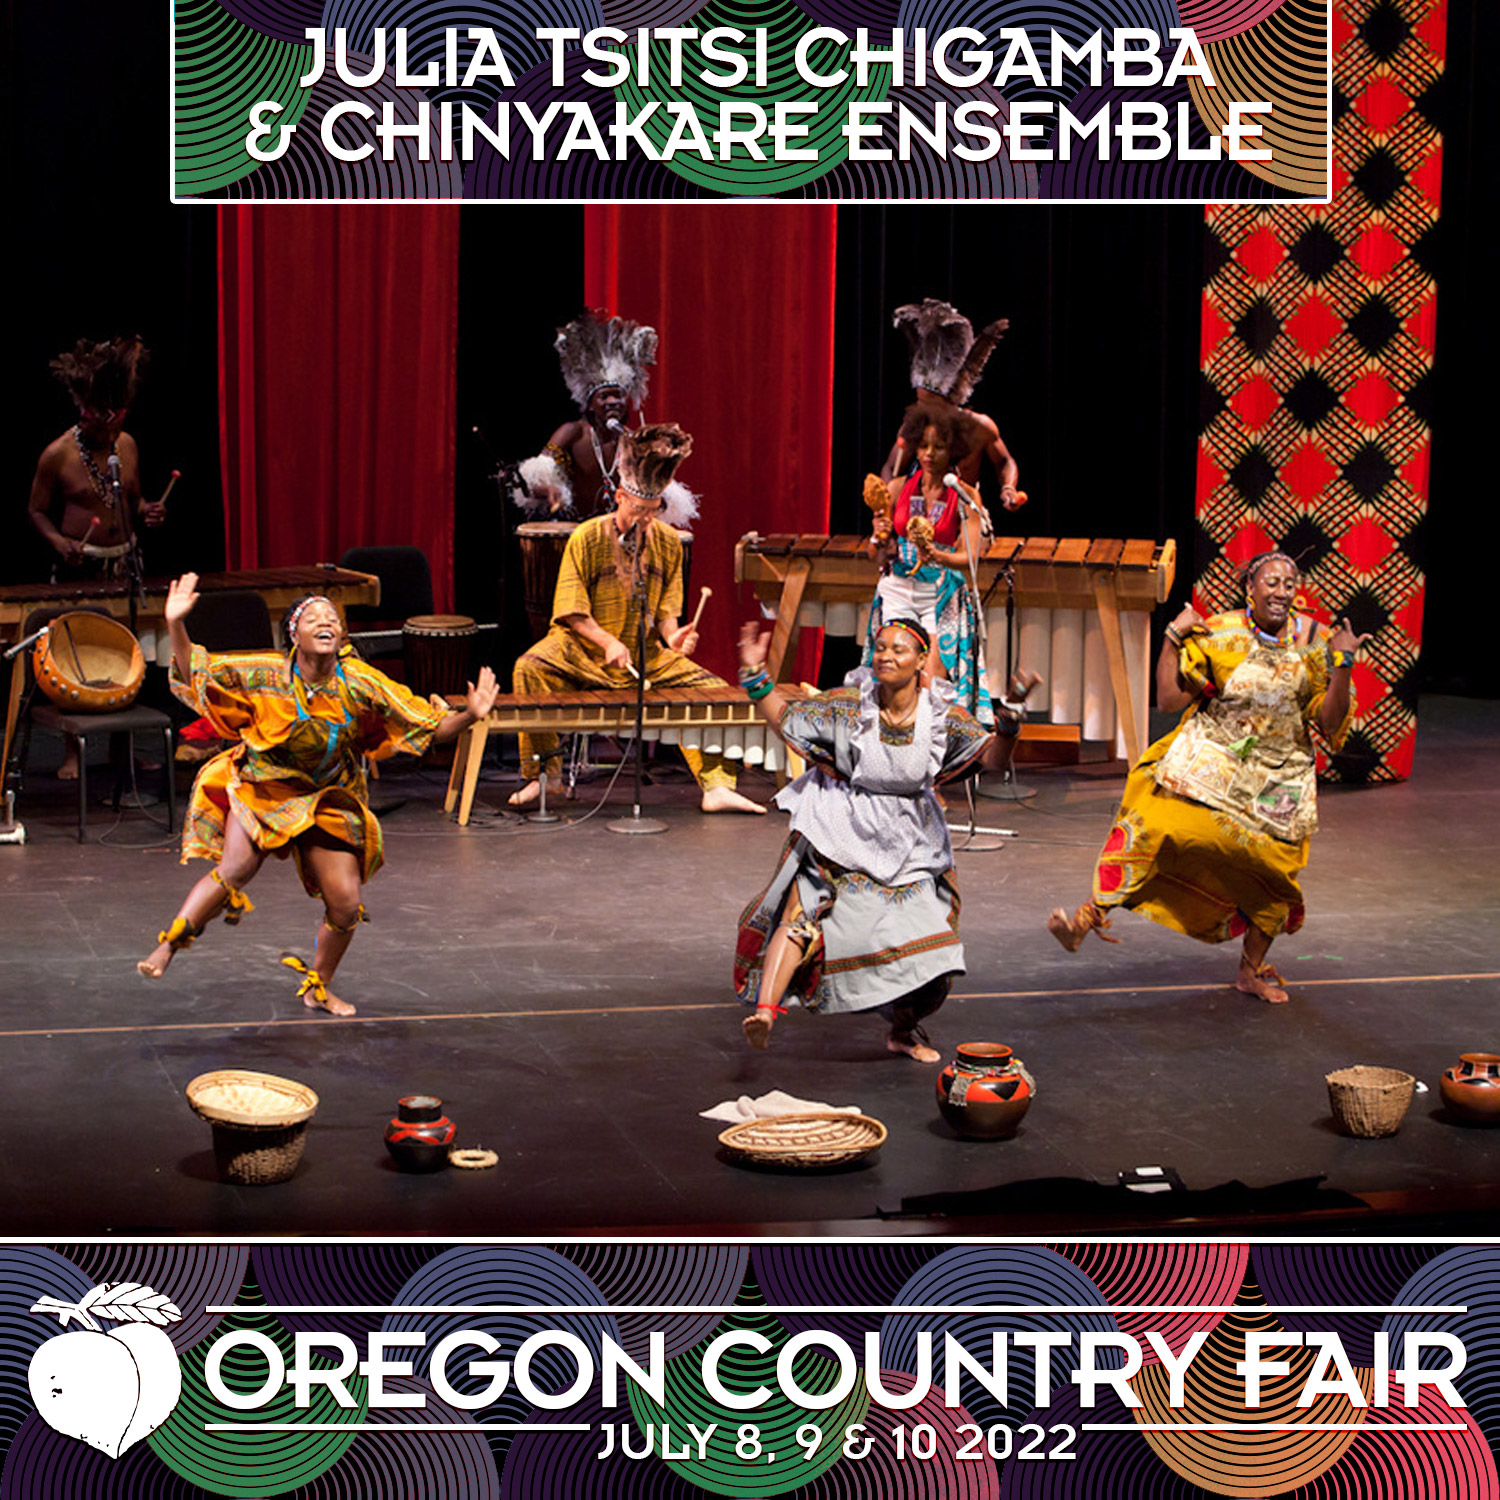 Photo of Julia Tsitsi Chigamba & Chinyakare Ensemble with header containing the group name and a footer with Oregon Country Fair, July 8, 9 & 10 2022